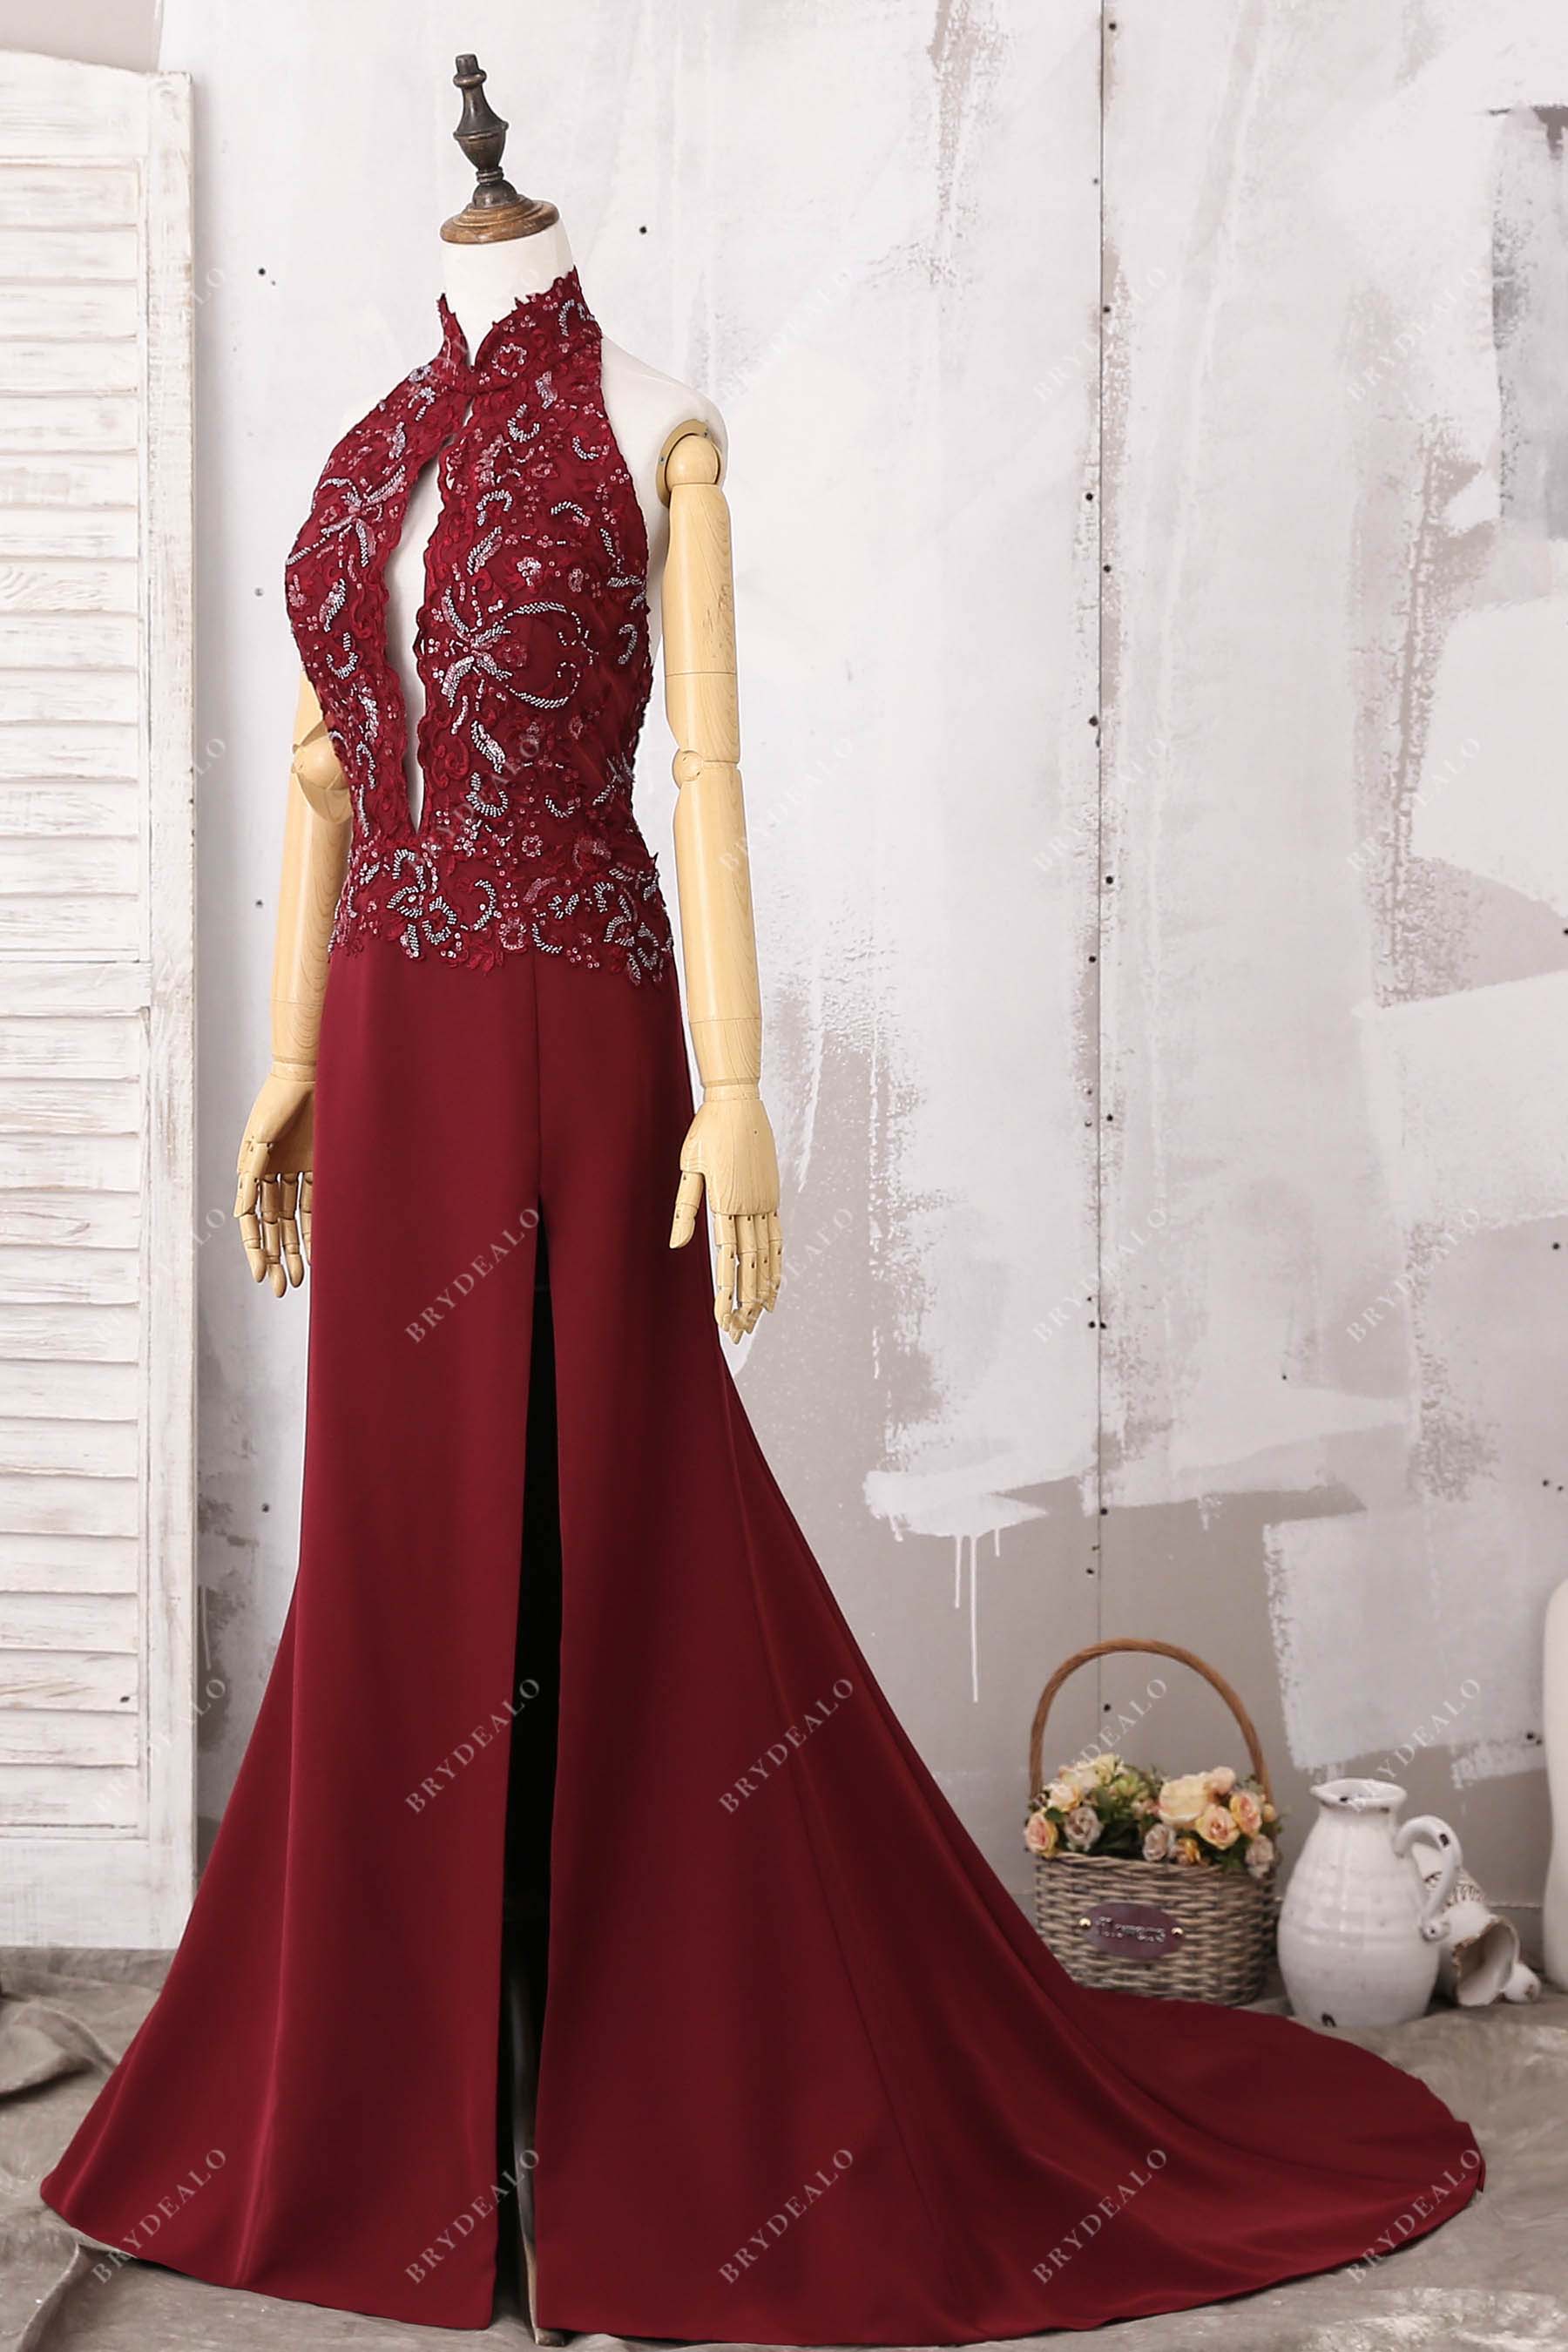 sequined lace burgundy keyhole high neck mermaid gown